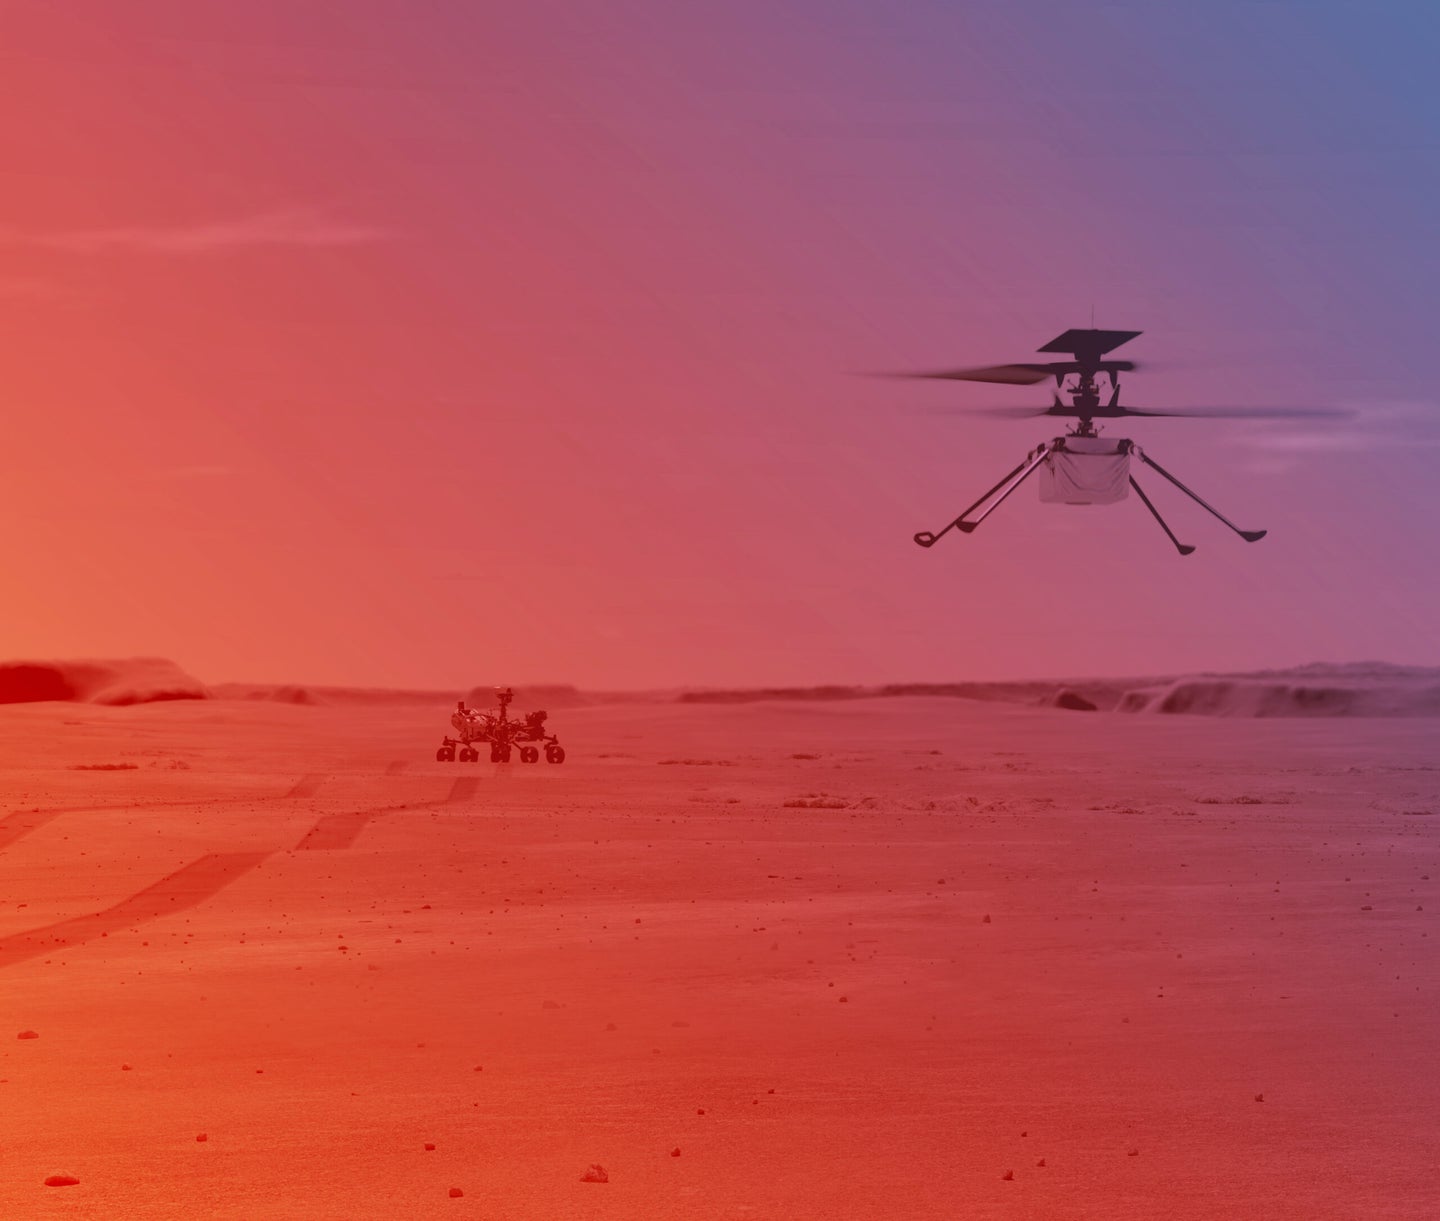 An illustration of the Mars Perseverance rover in the background and the Ingenuity helicopter in flight in the foreground.